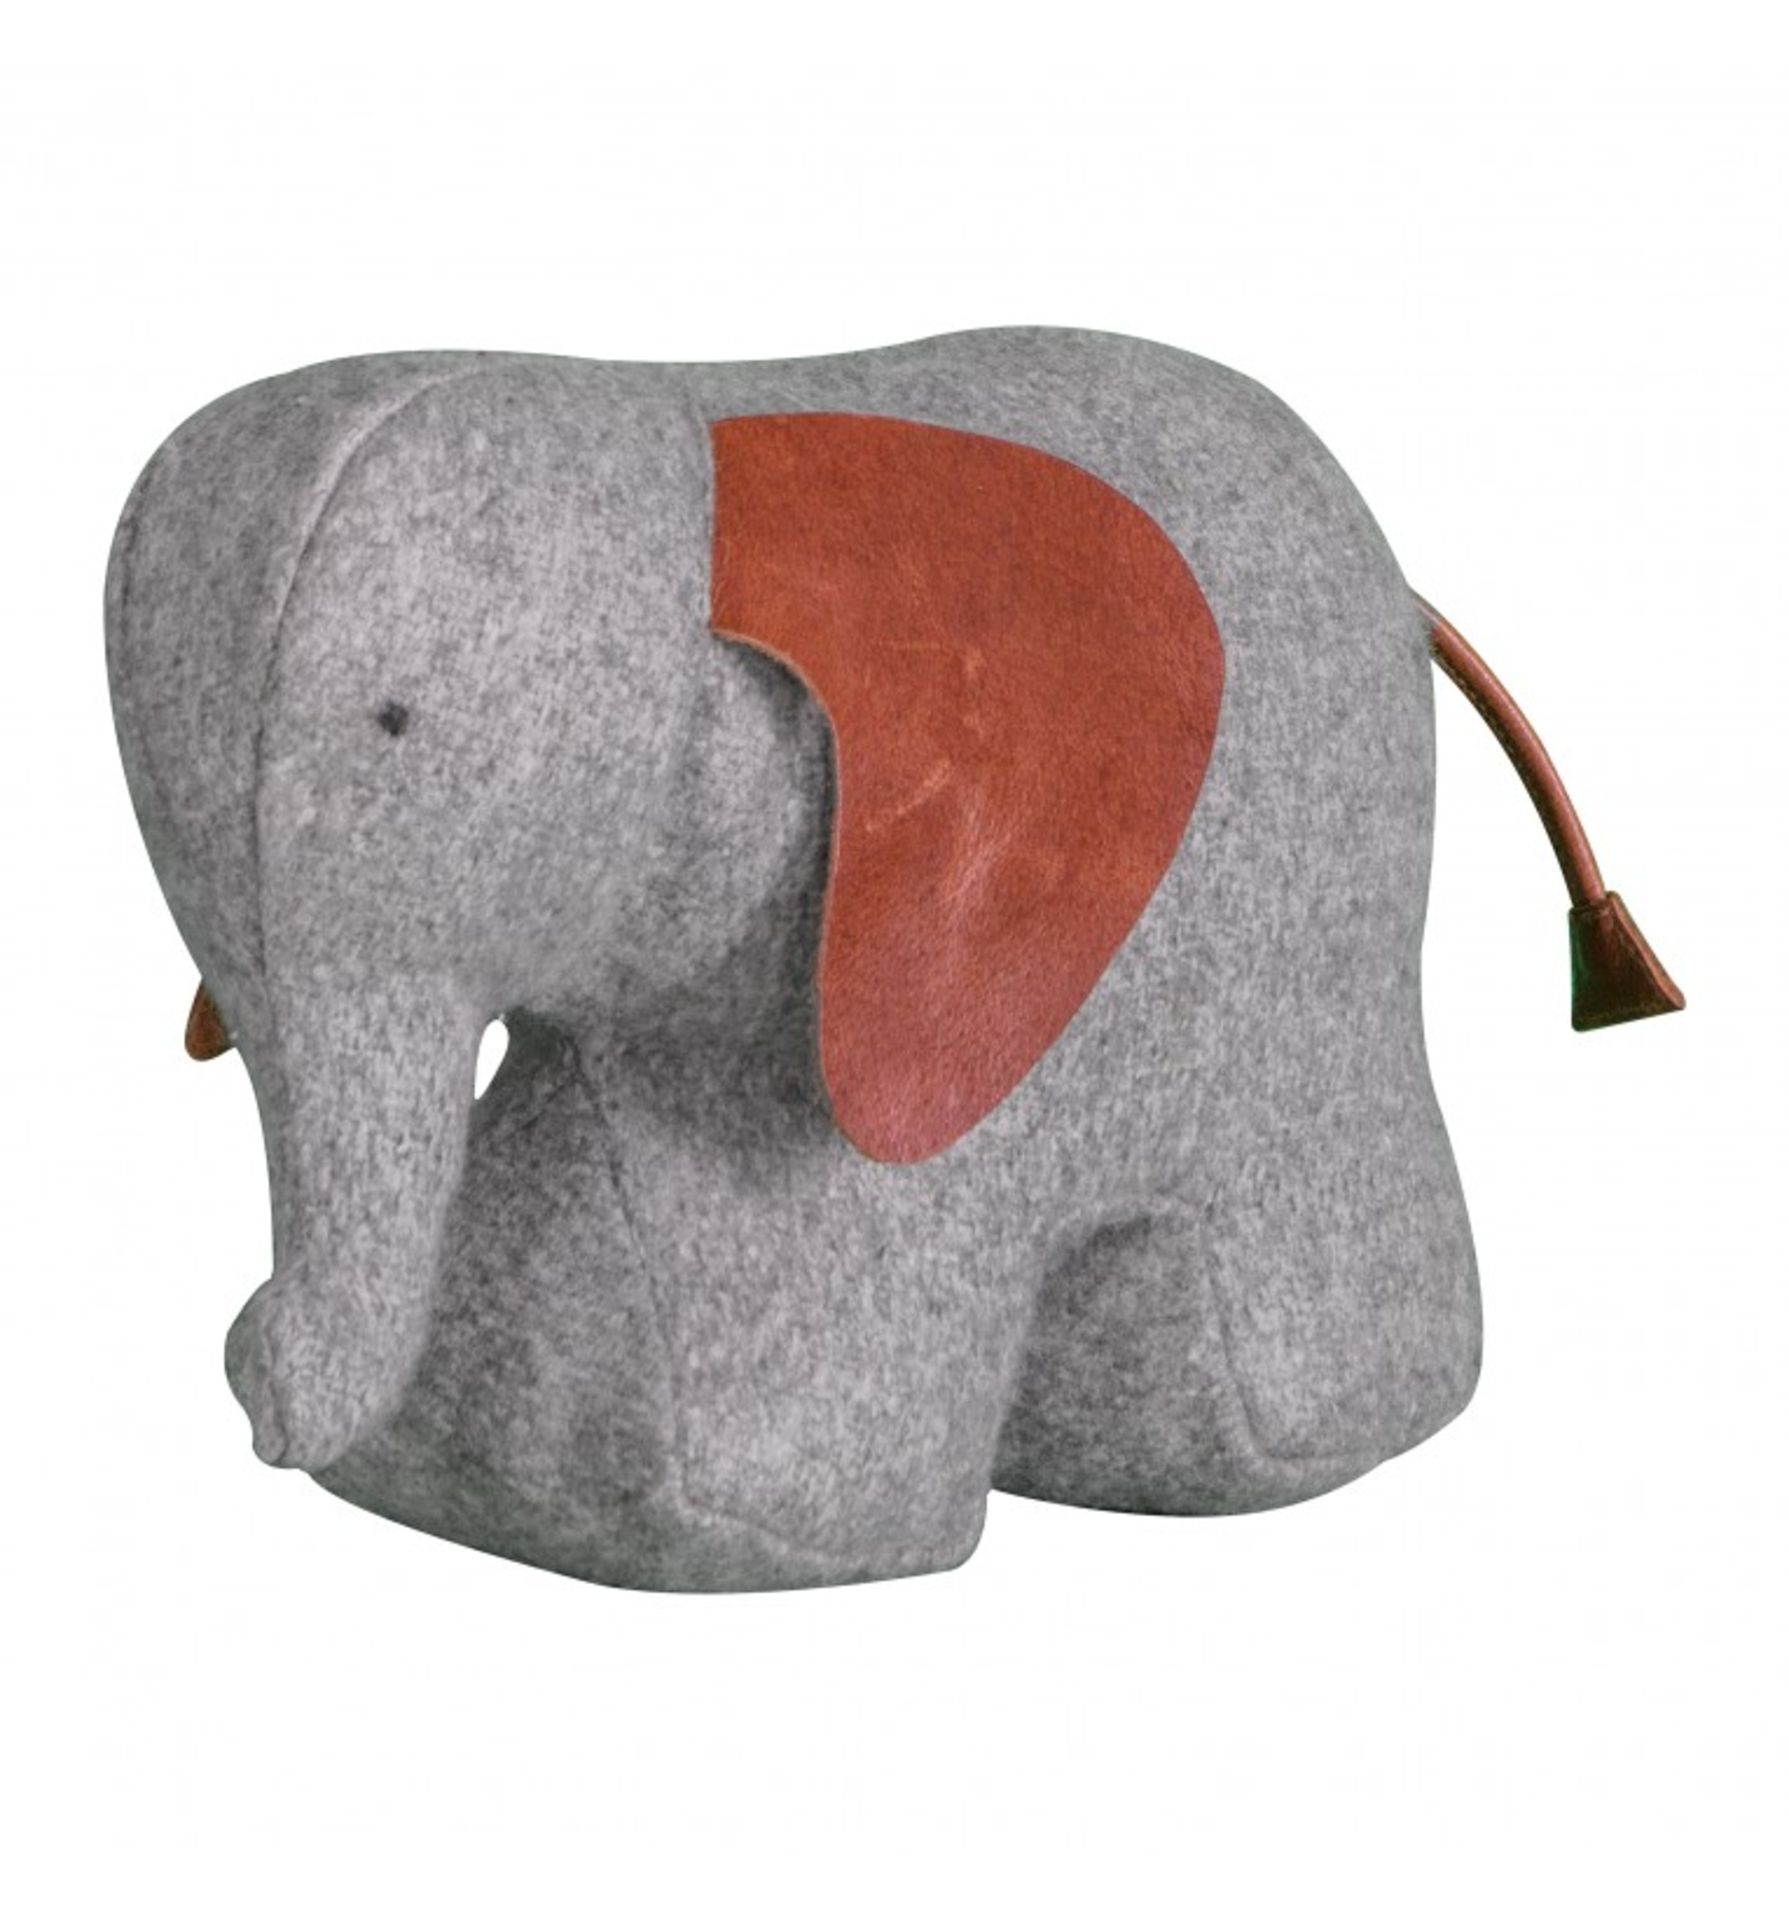 Ethan Elephant Doorstop Marmalade Design The Marmalade Designs collection offers a diverse range